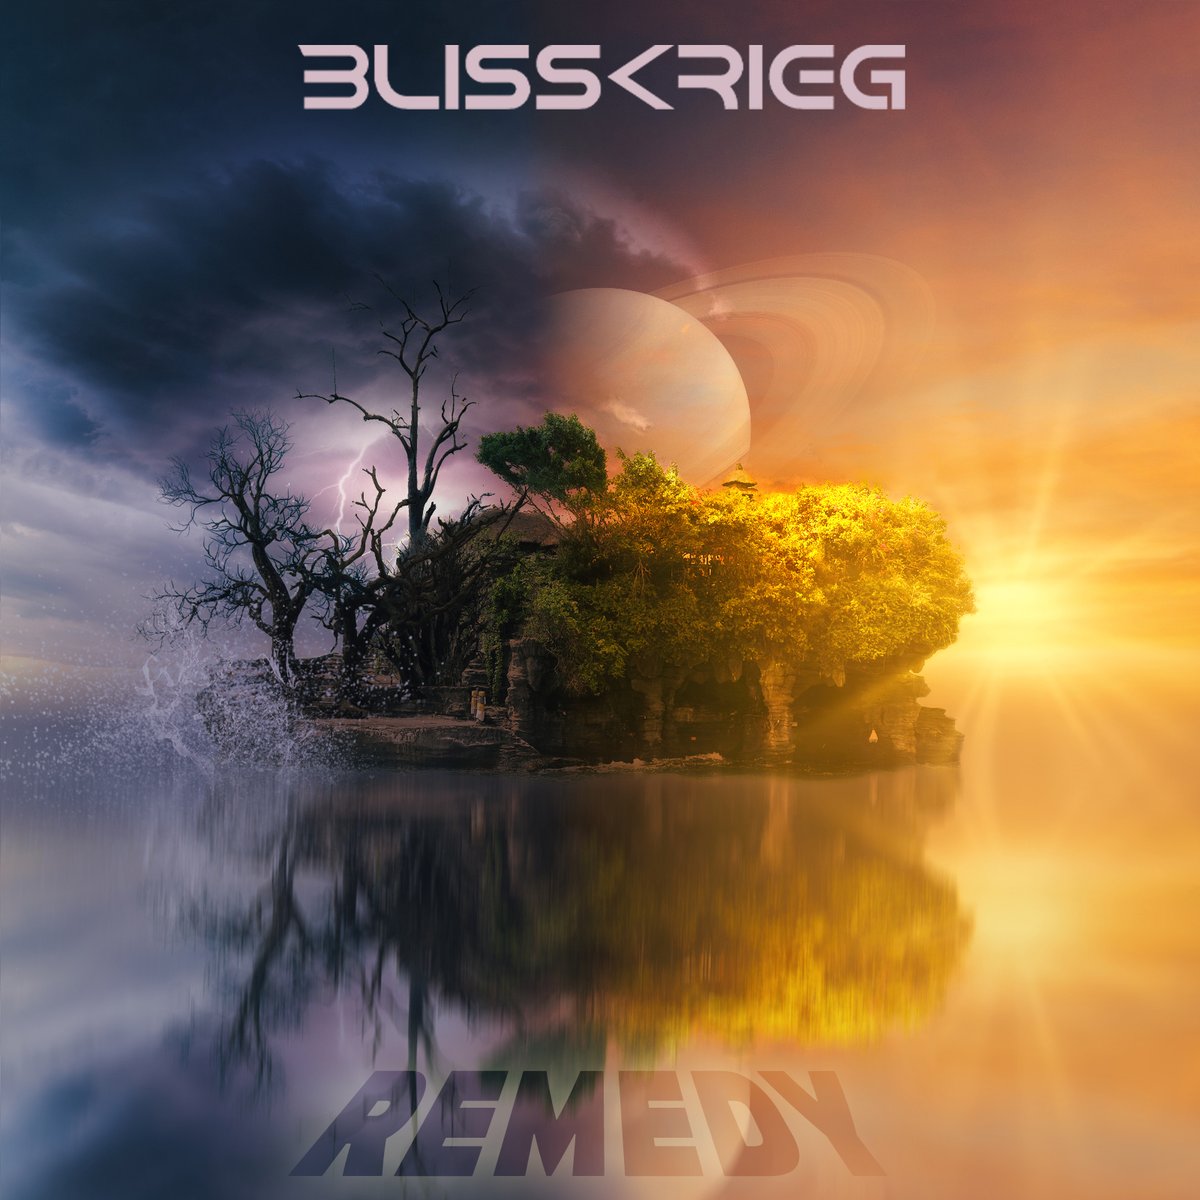 Featuring former members of @officialtantric, @thedaysofthenew, #Submersed, and @EyeEmpire, @BlisskriegBand came to be in 2020. Recently, we spoke with the group about their formation and their new album #Remedy. v13.net/2021/03/blissk…